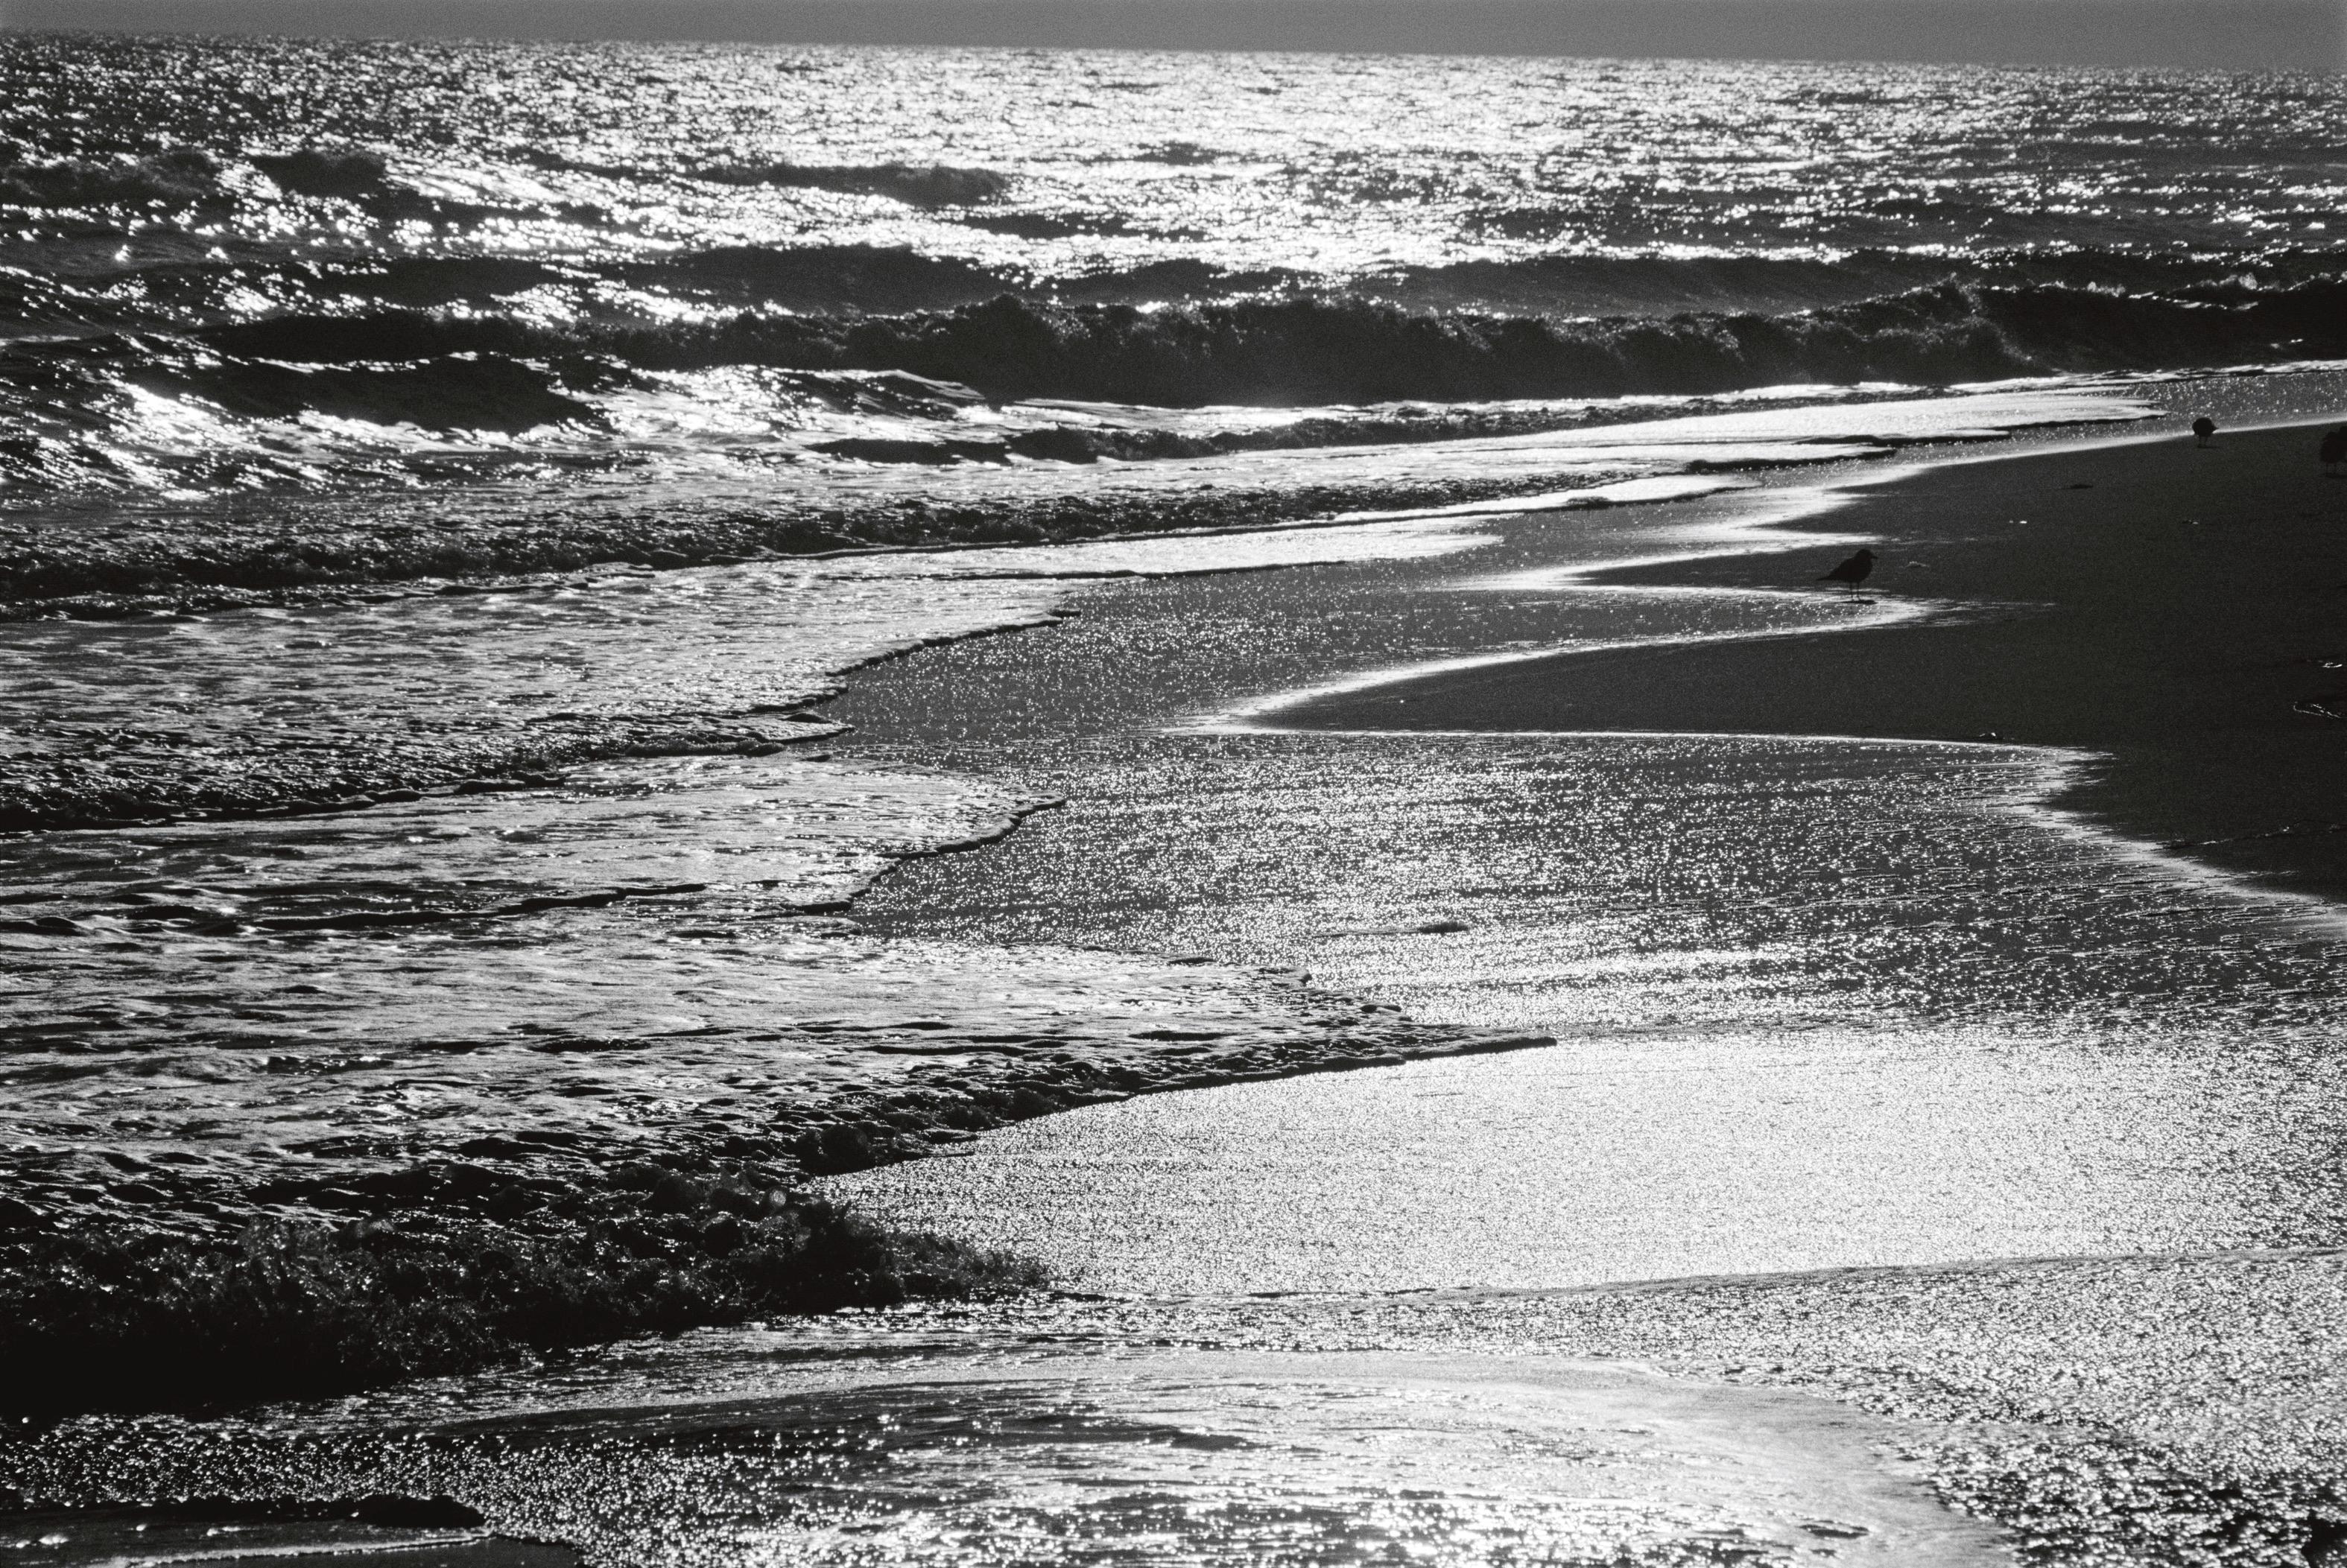 Michael Doster Black and White Photograph - San Lucia, 1989, Analog Photography, C-Print, seascape, black and white